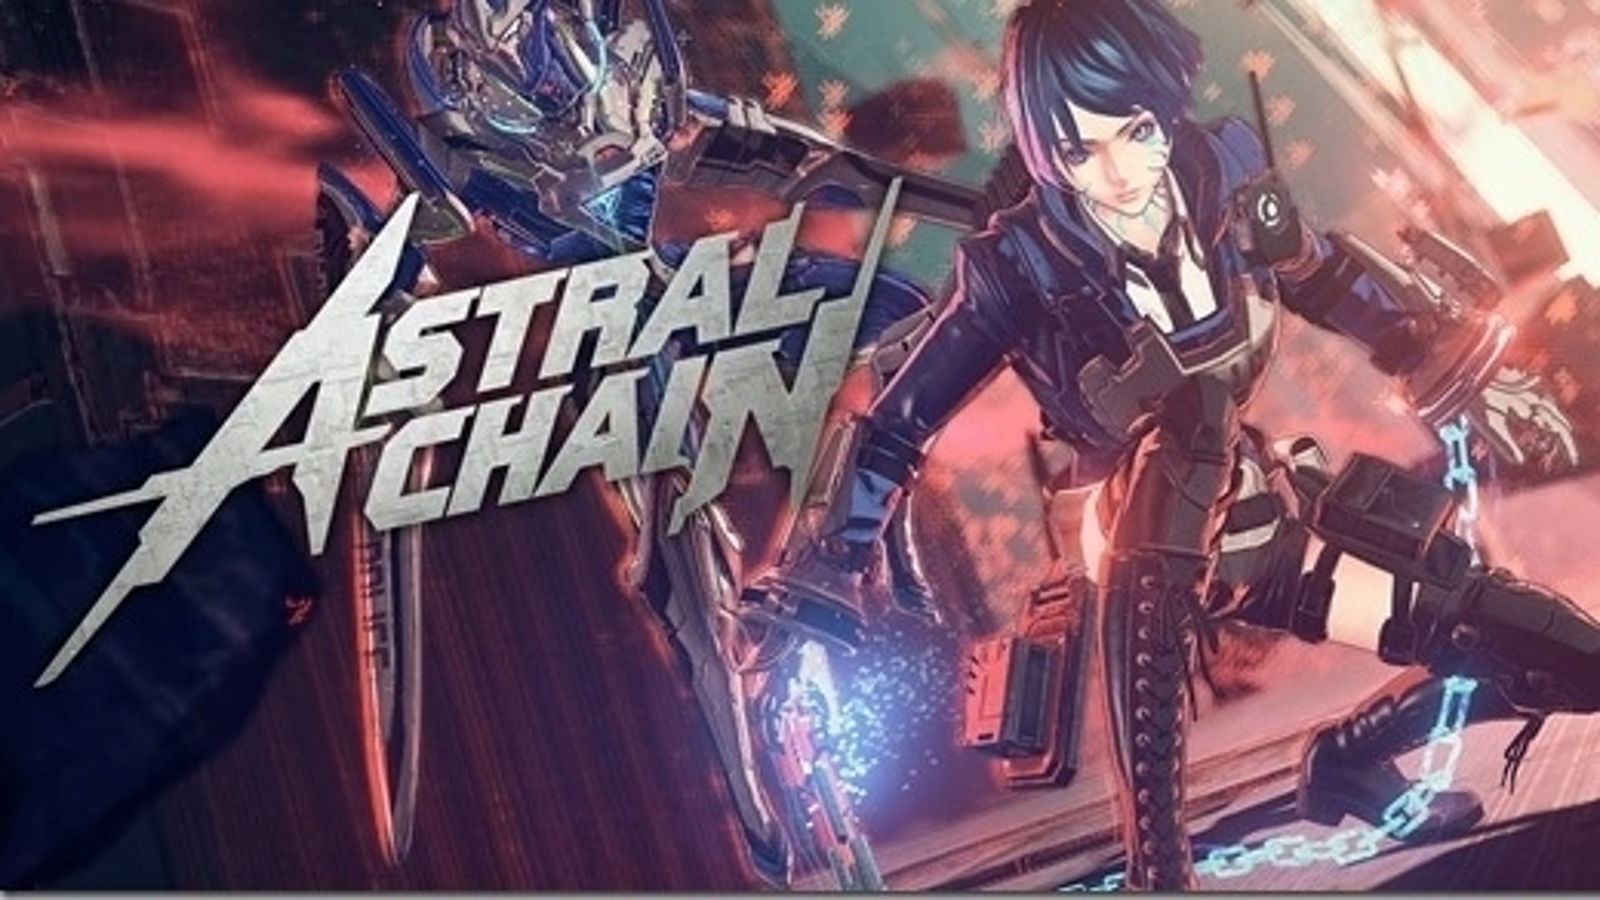 Chains' a masterpiece of visuals and game play